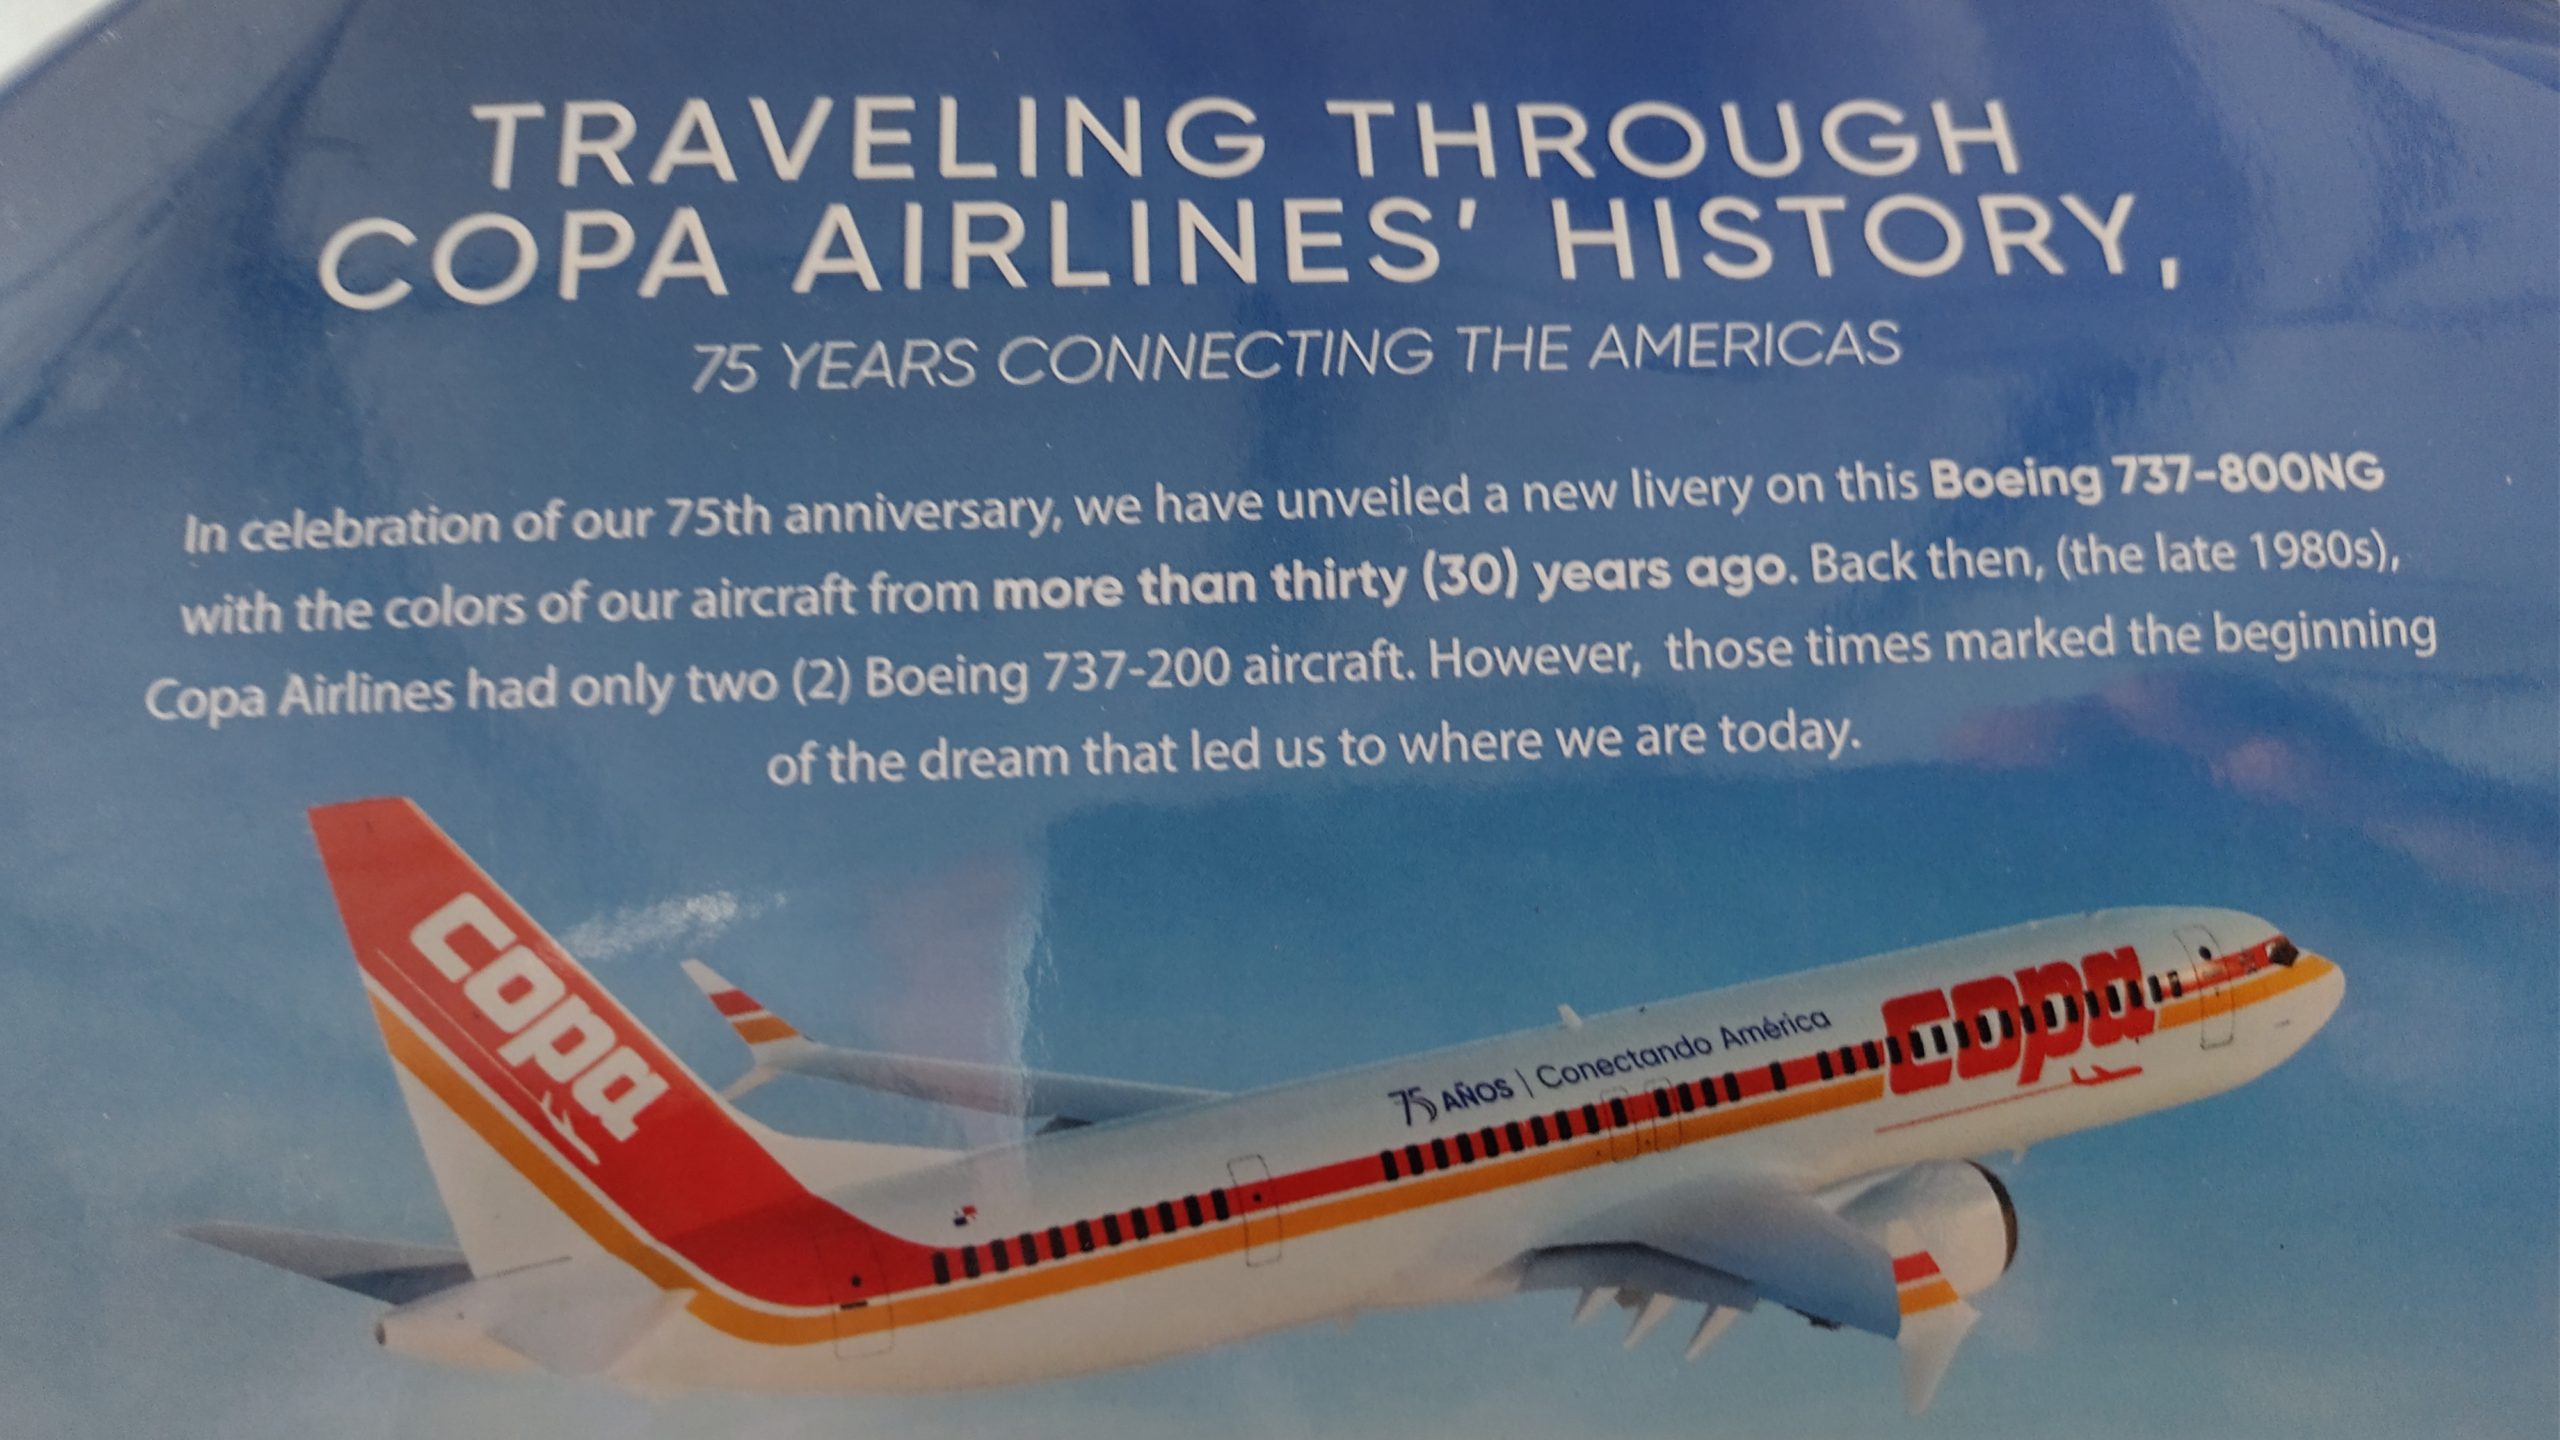 PICTURE OF COPA HISTORY FLYER